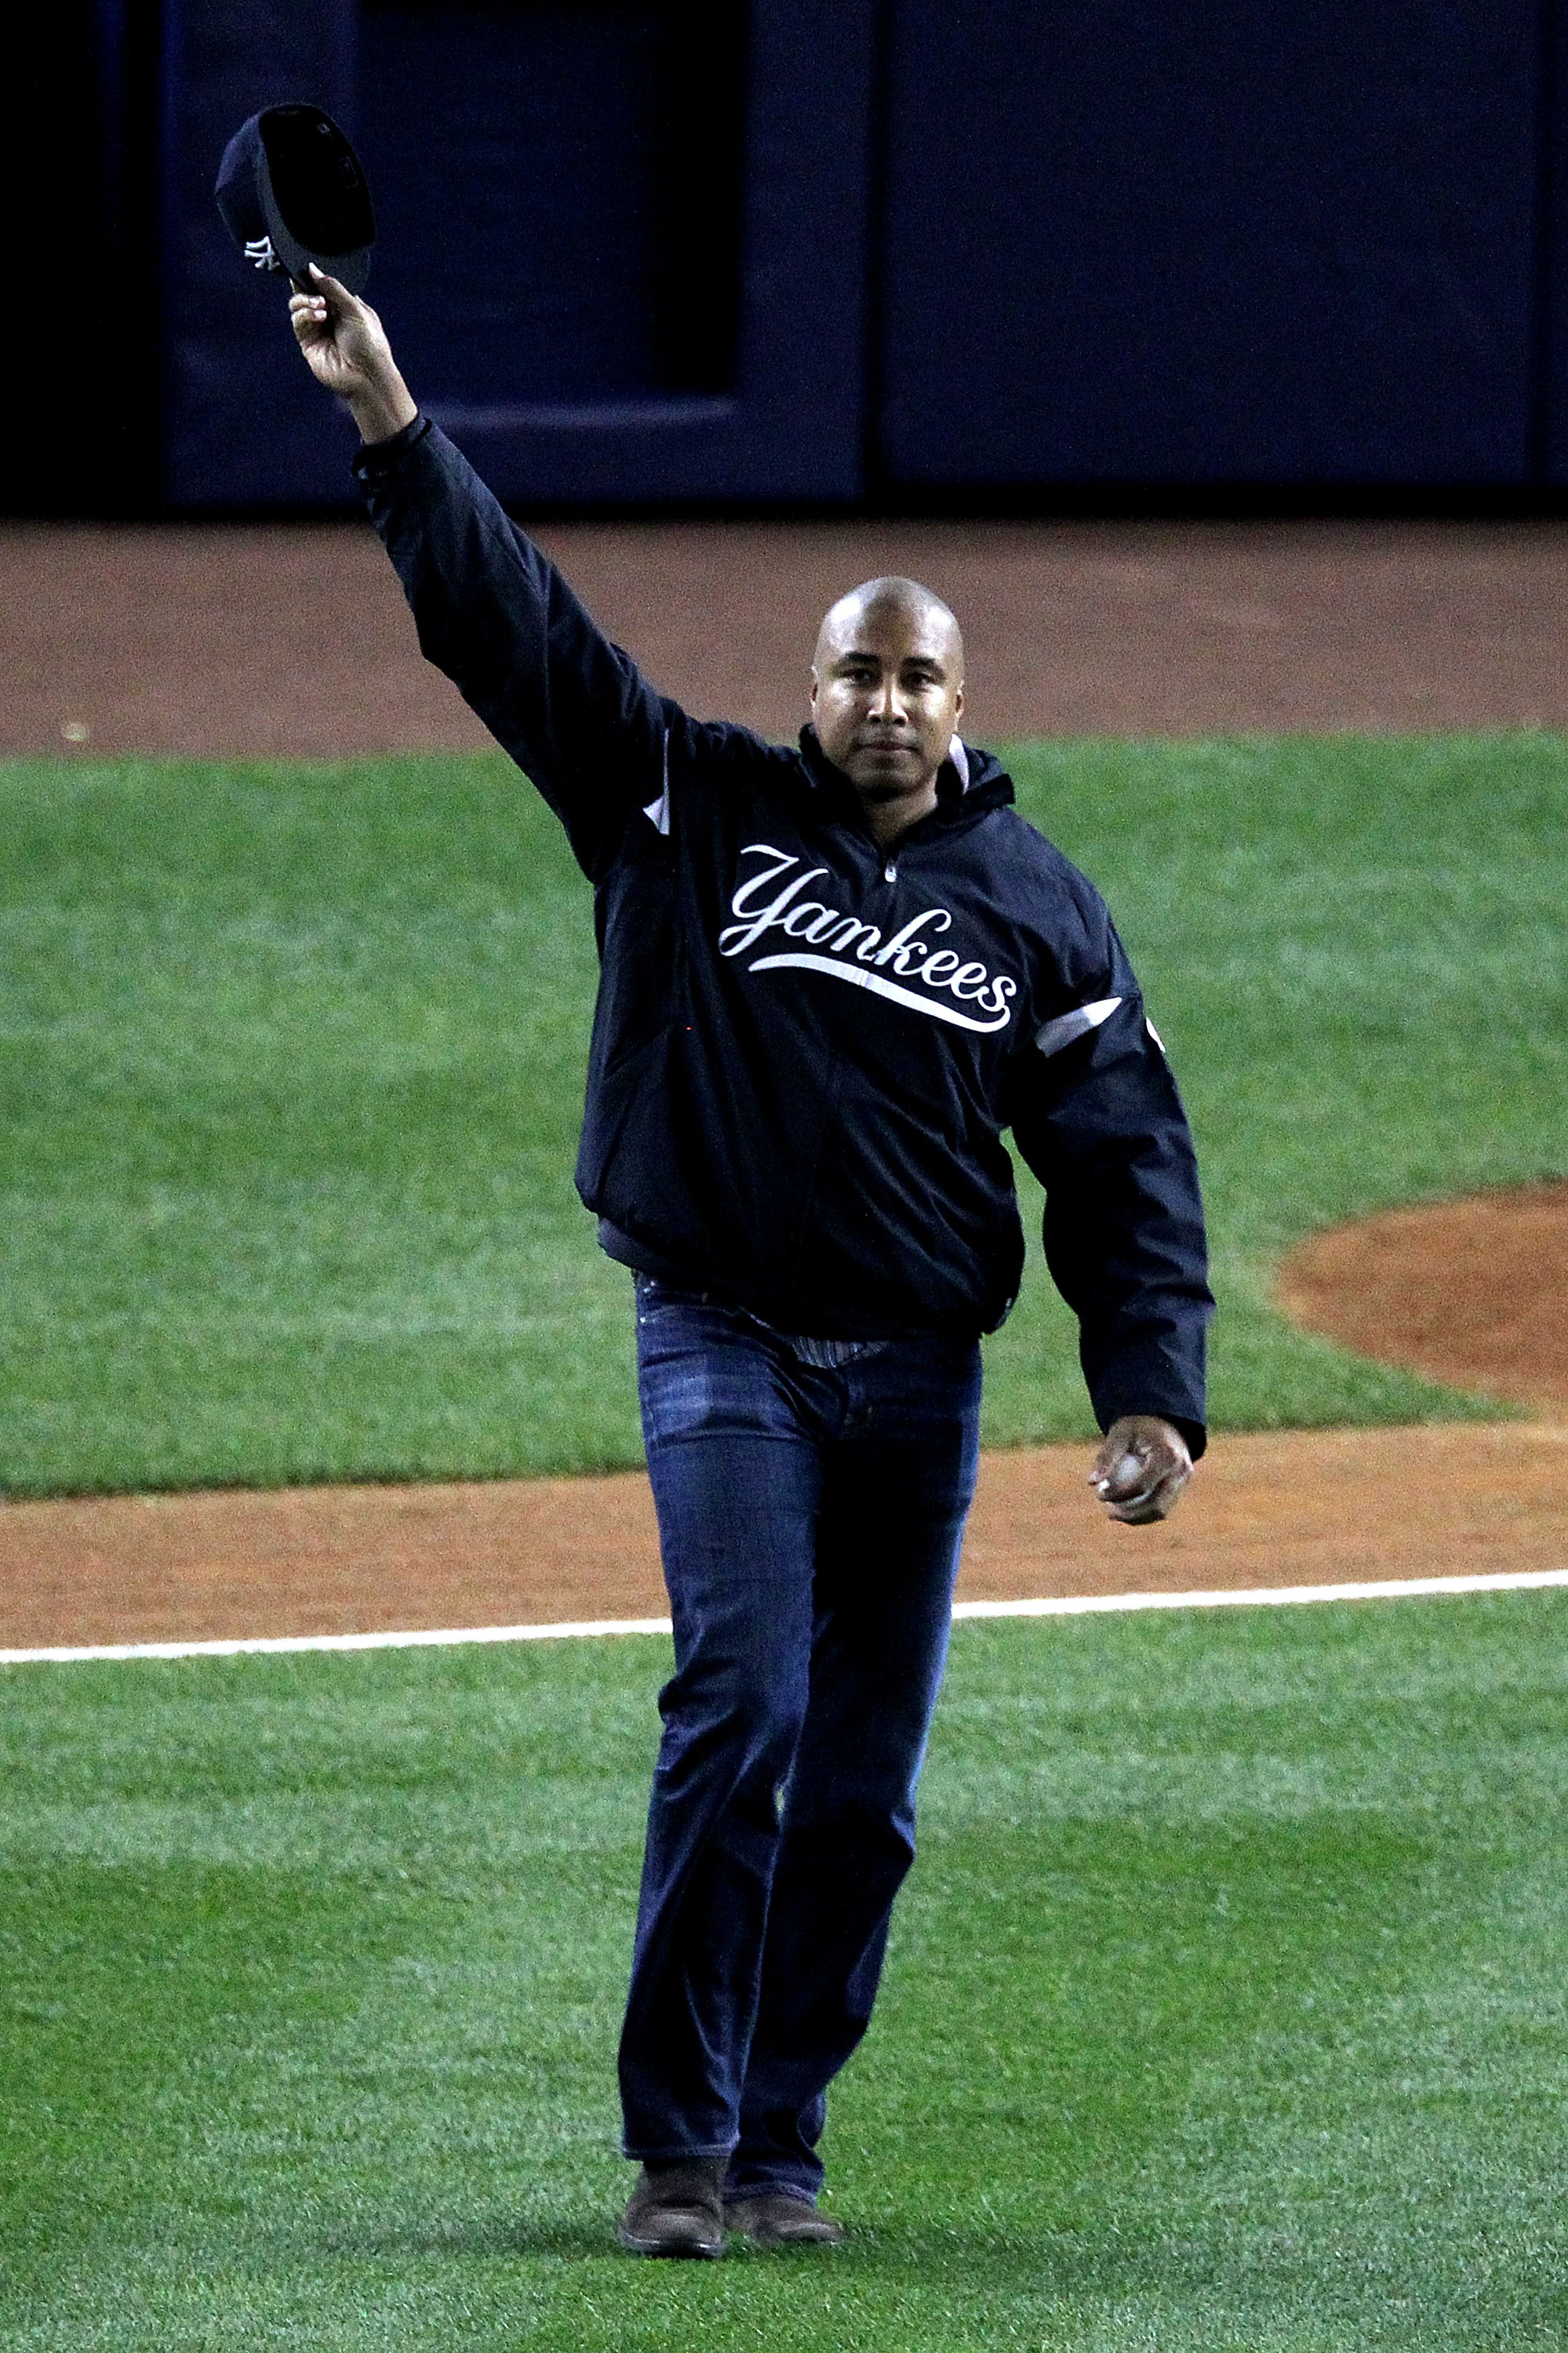 NEW YORK - OCTOBER 19:  Former New York Yankee Bernie Williams waves before throwing out the first pitch prior to Game Four of the ALCS during the 2010 MLB Playoffs at Yankee Stadium on October 19, 2010 in the Bronx borough of New York City.  (Photo by Al